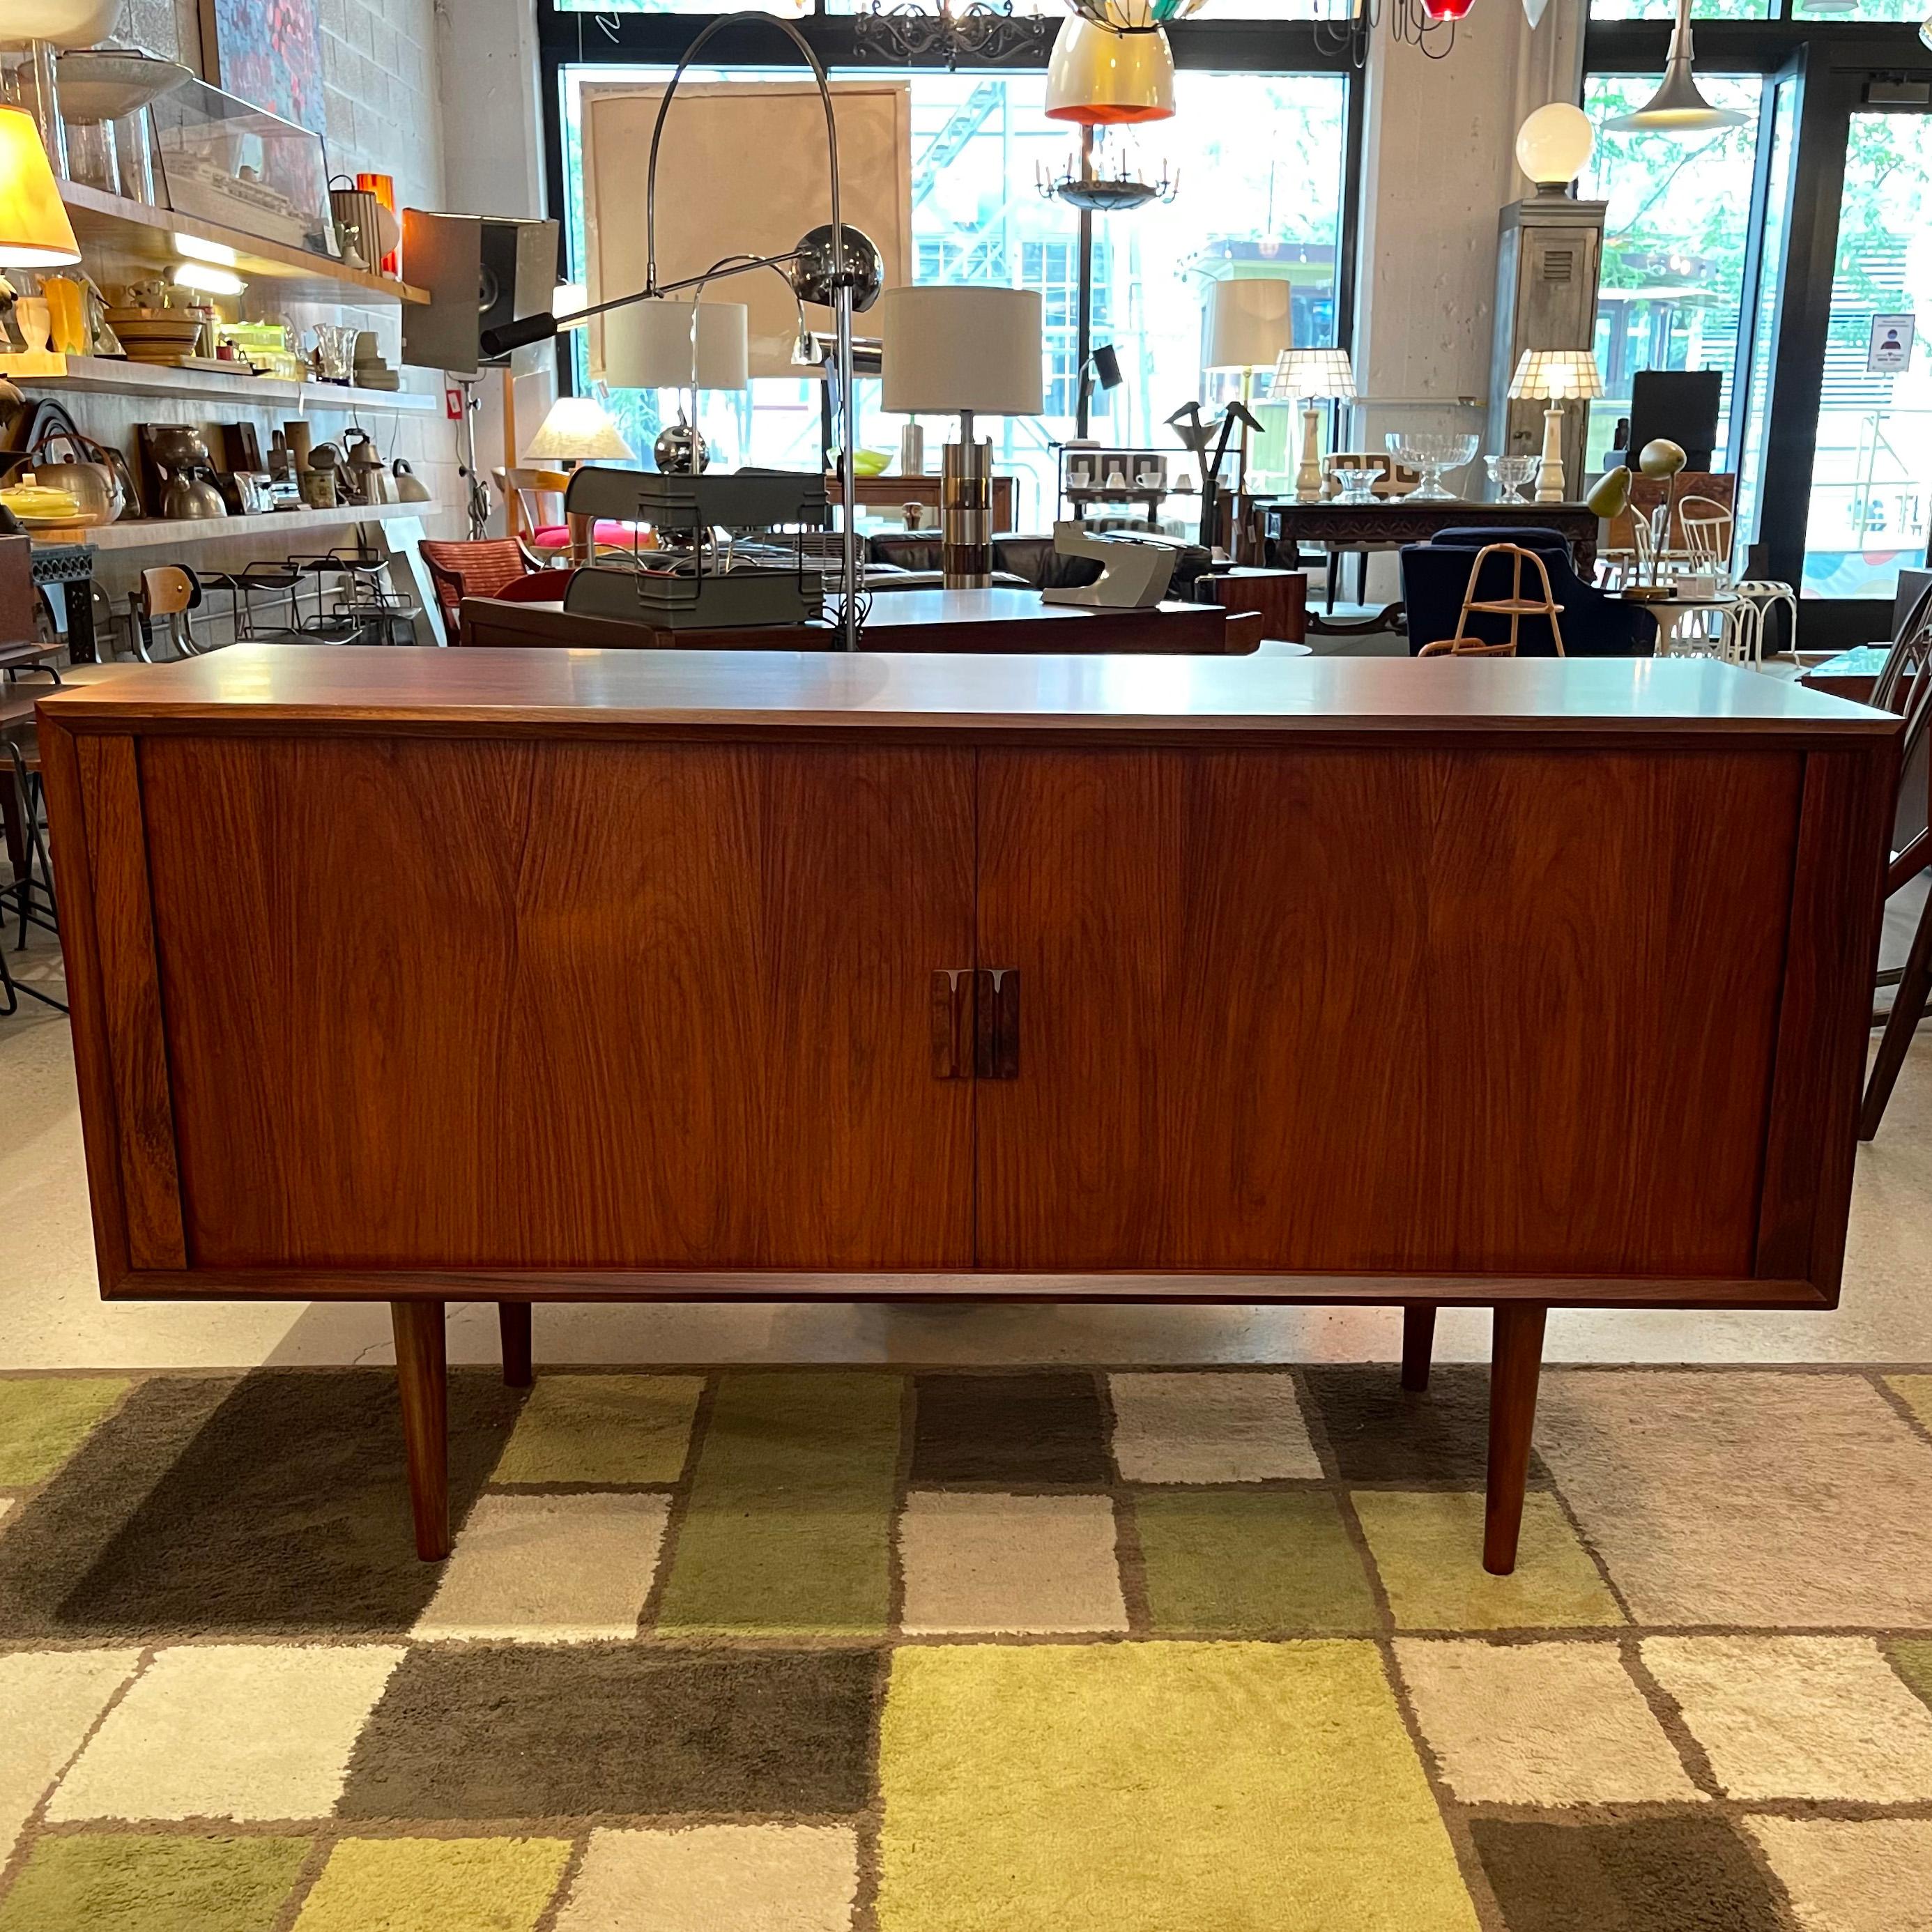 Danish modern, rosewood credenza by Svend Aage Larsen for Faarup Mobelfabrik features a tambour front with interior shelves and pull-out drawers. The credenza is nicely sized at 59 inches wide and finshed on the back so it can float in a room.